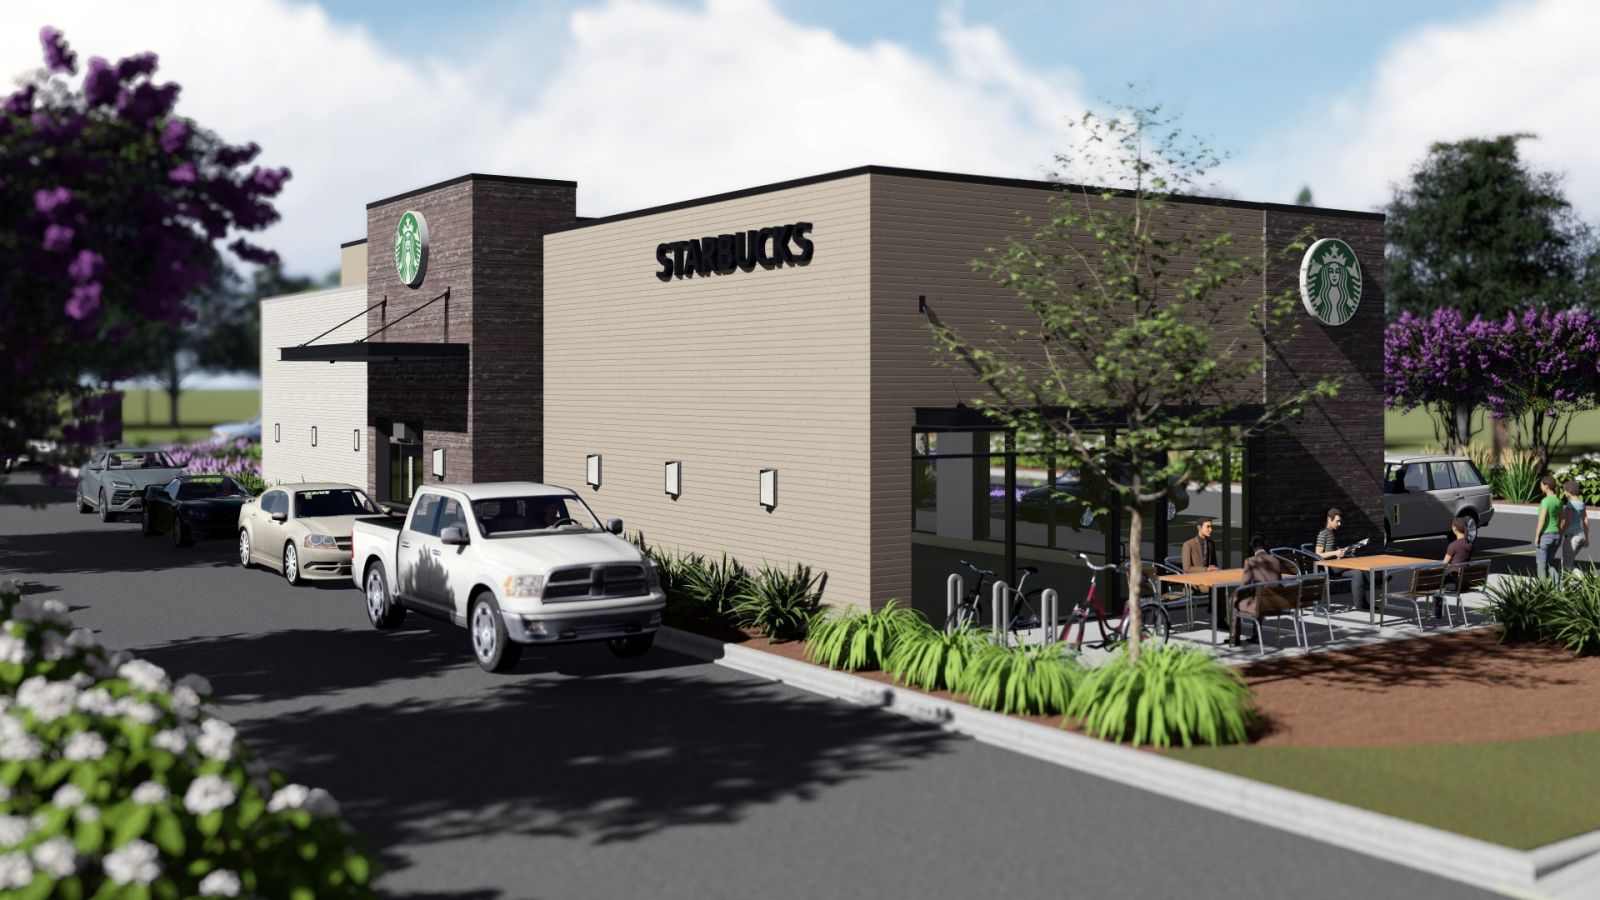 A new Starbucks location set to open at 2509 Forest Drive in August will include a Community Store, which will provide education and workforce training. (Rendering/Provided)